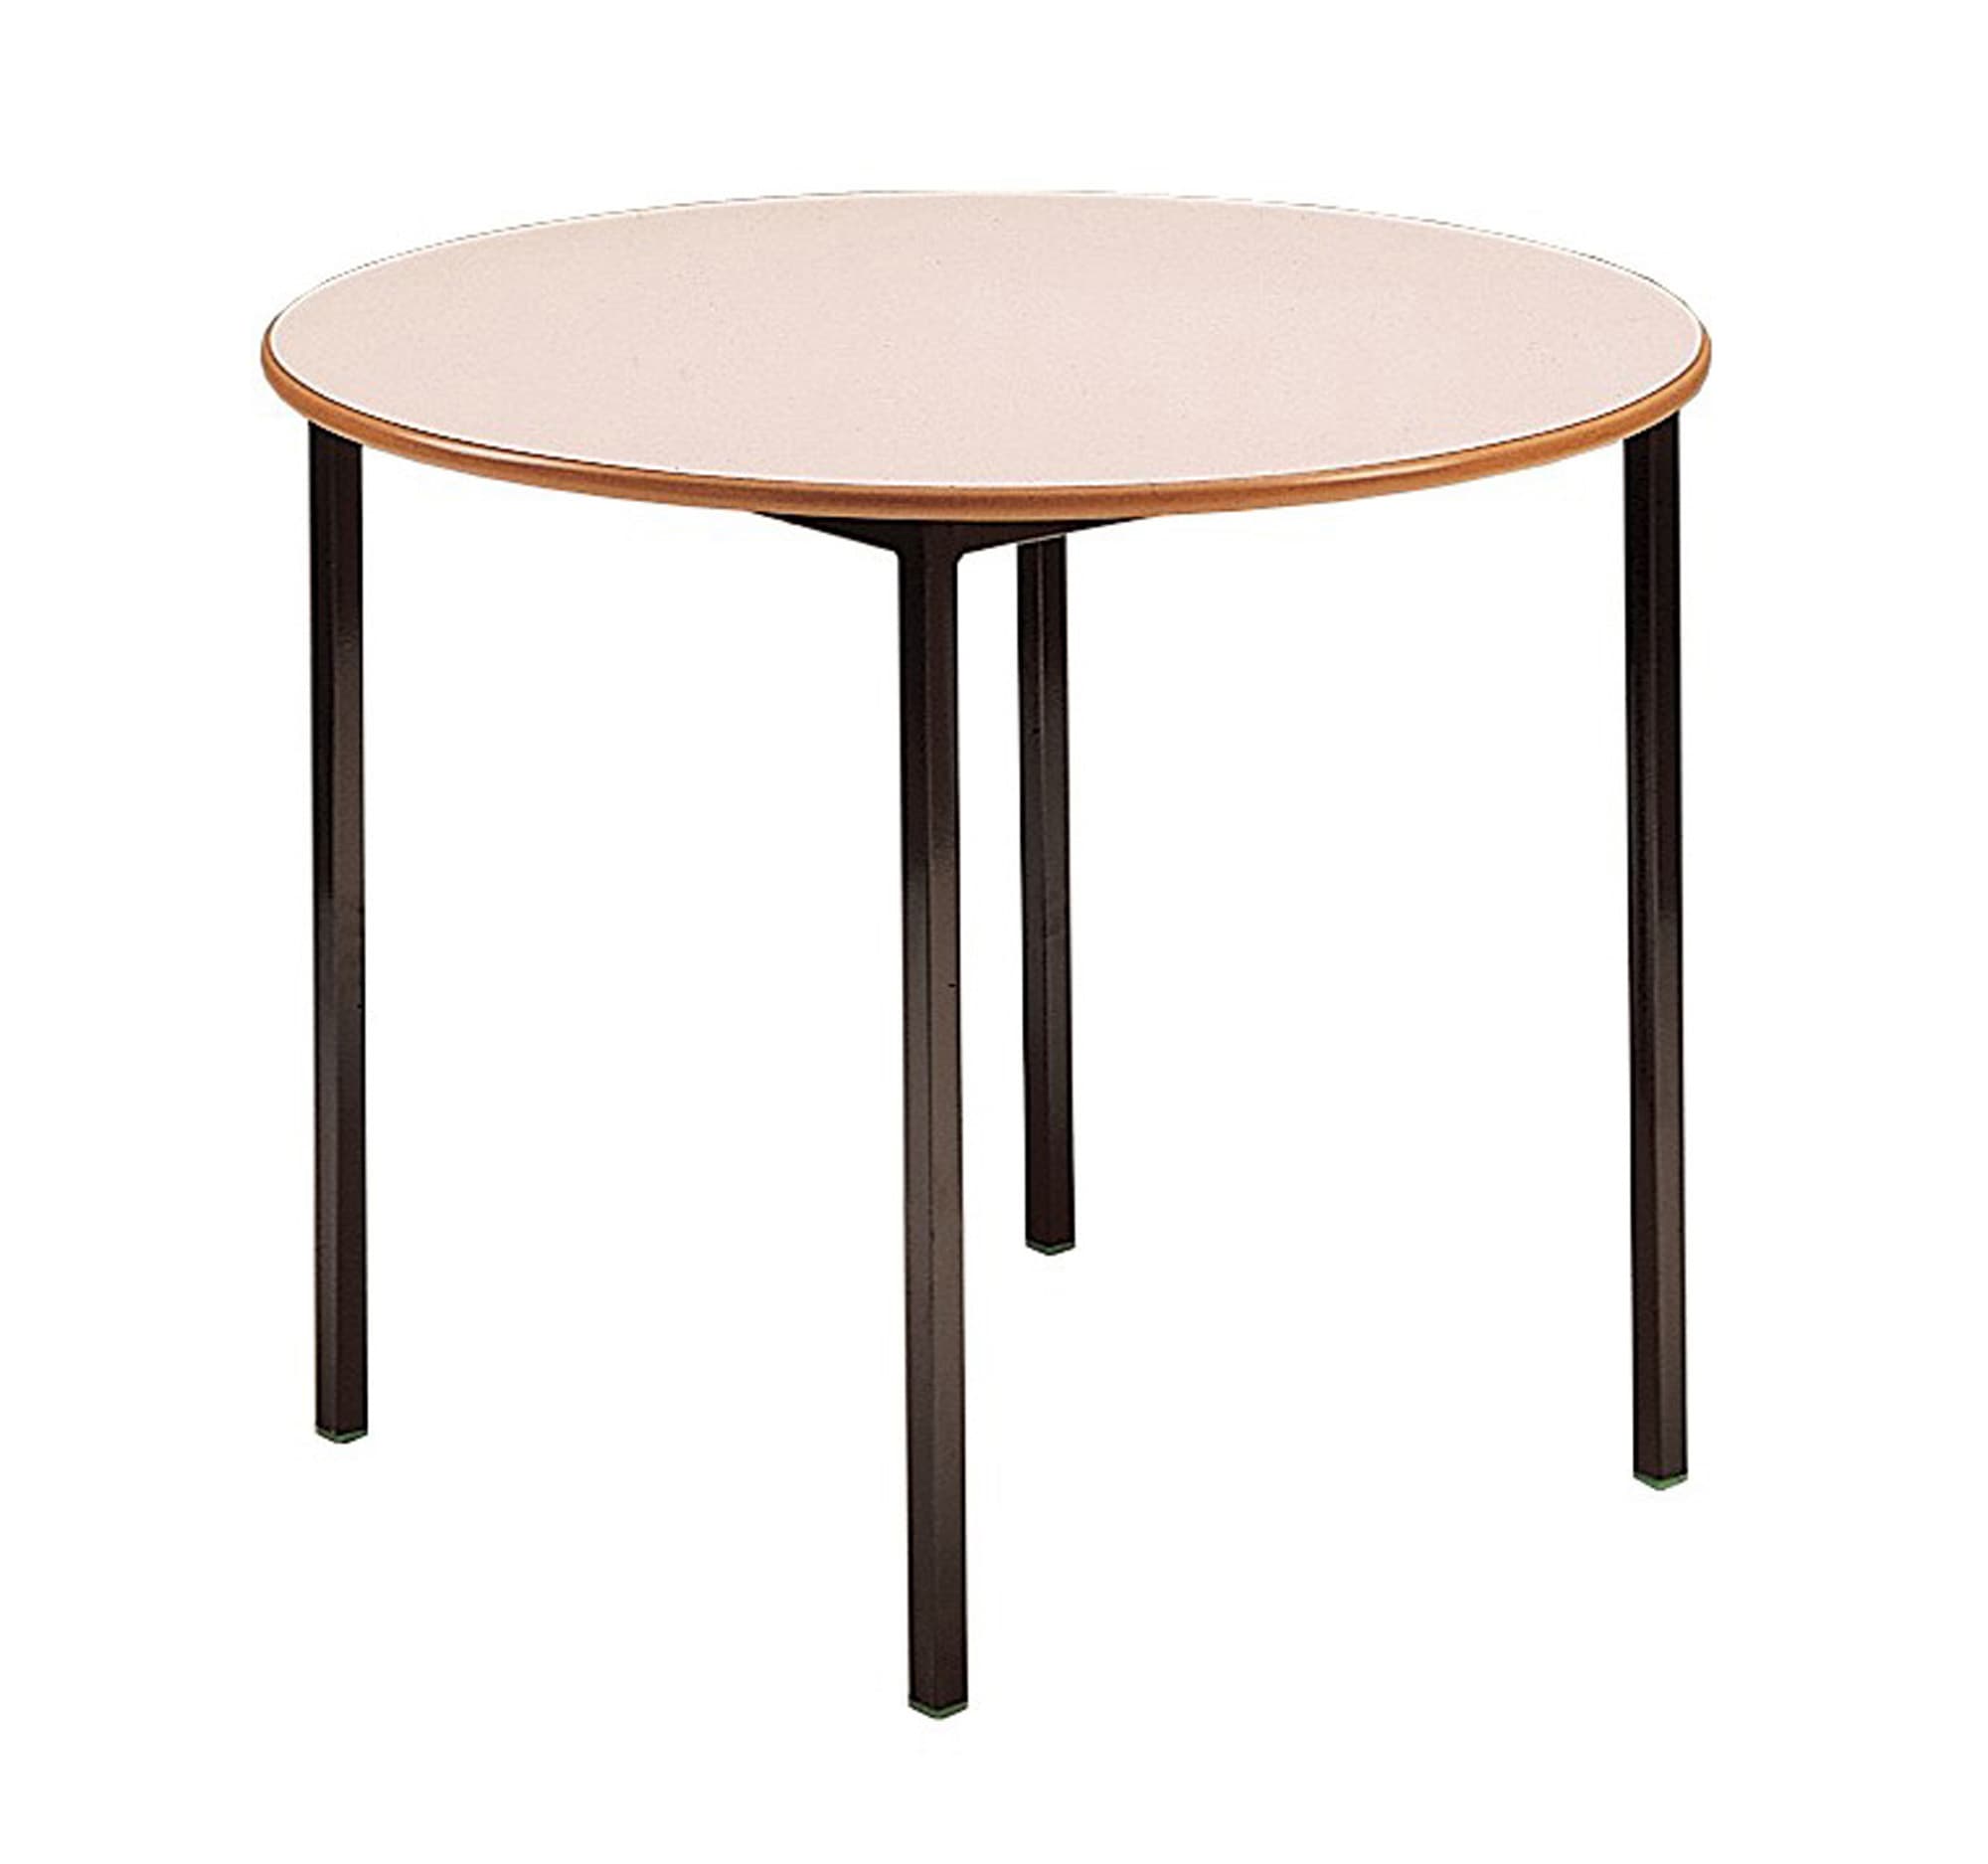 Fully Welded Circle Classroom Tables